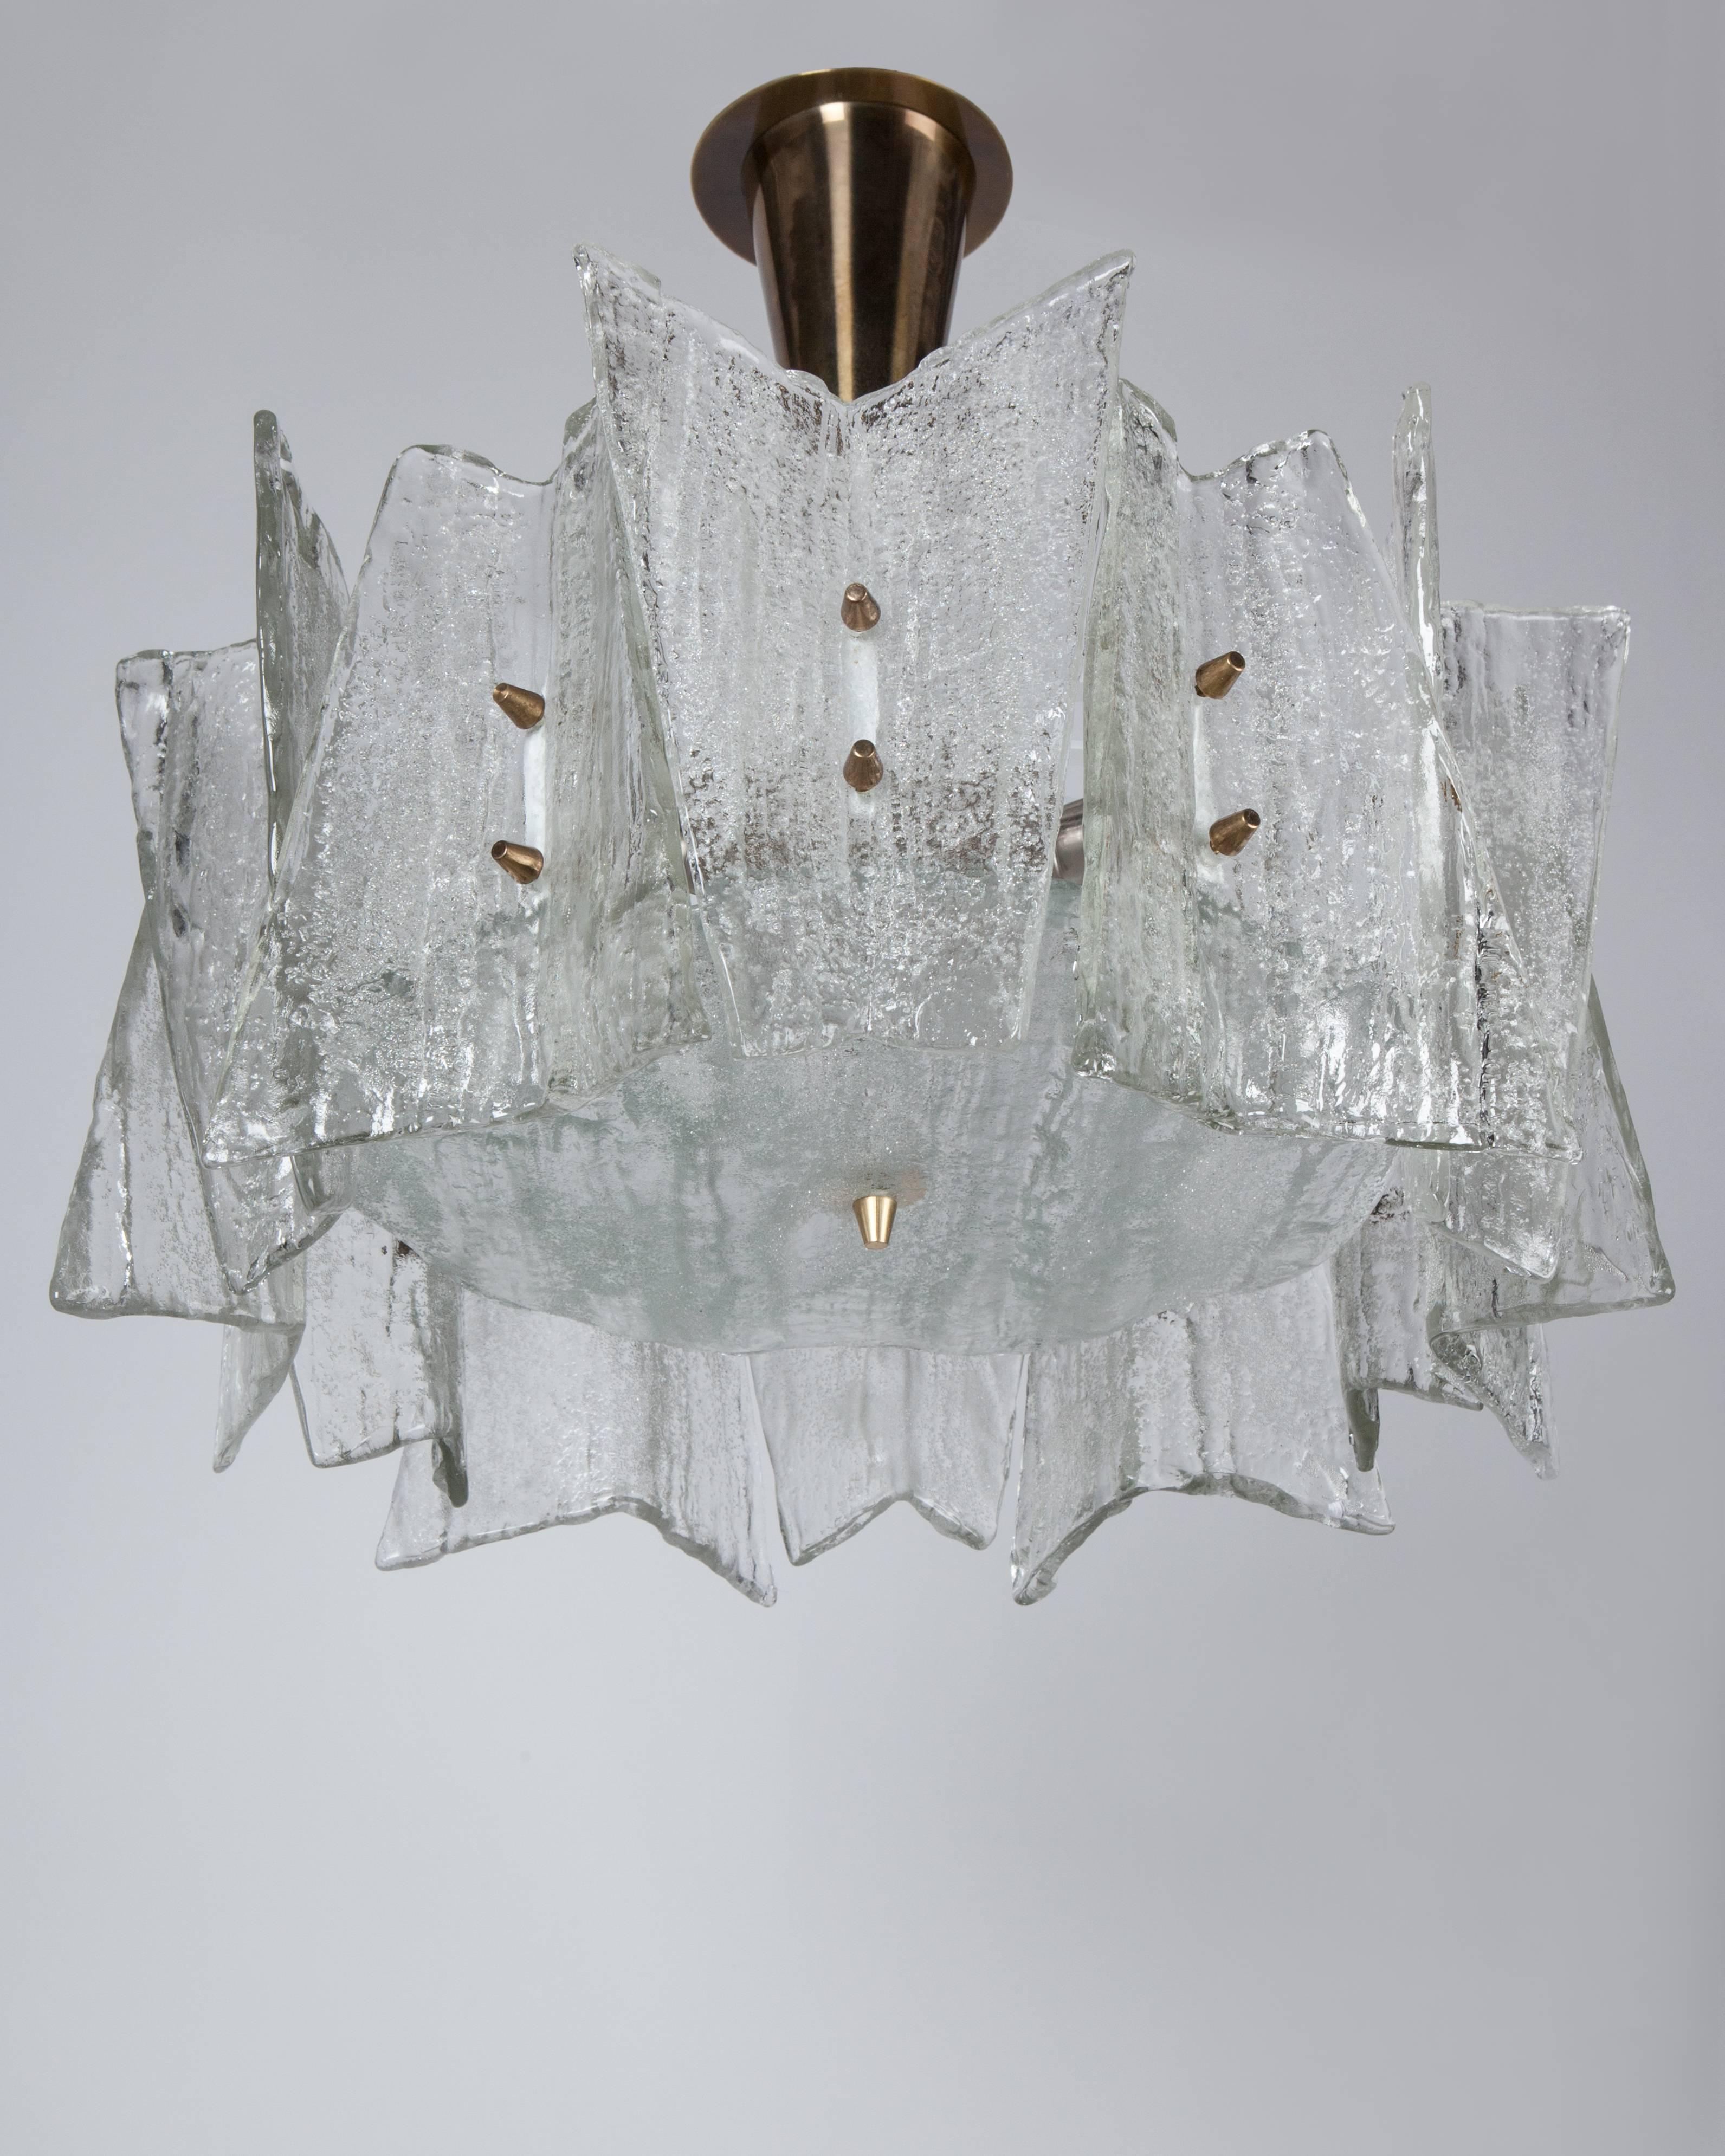 AHL4042
A vintage pendant with cast seeded glass tiles, folded into angular shapes, on a white lacquered frame with its original brass fittings. Attributed to the German maker Kaiser. Due to the antique nature of this fixture, there may be some